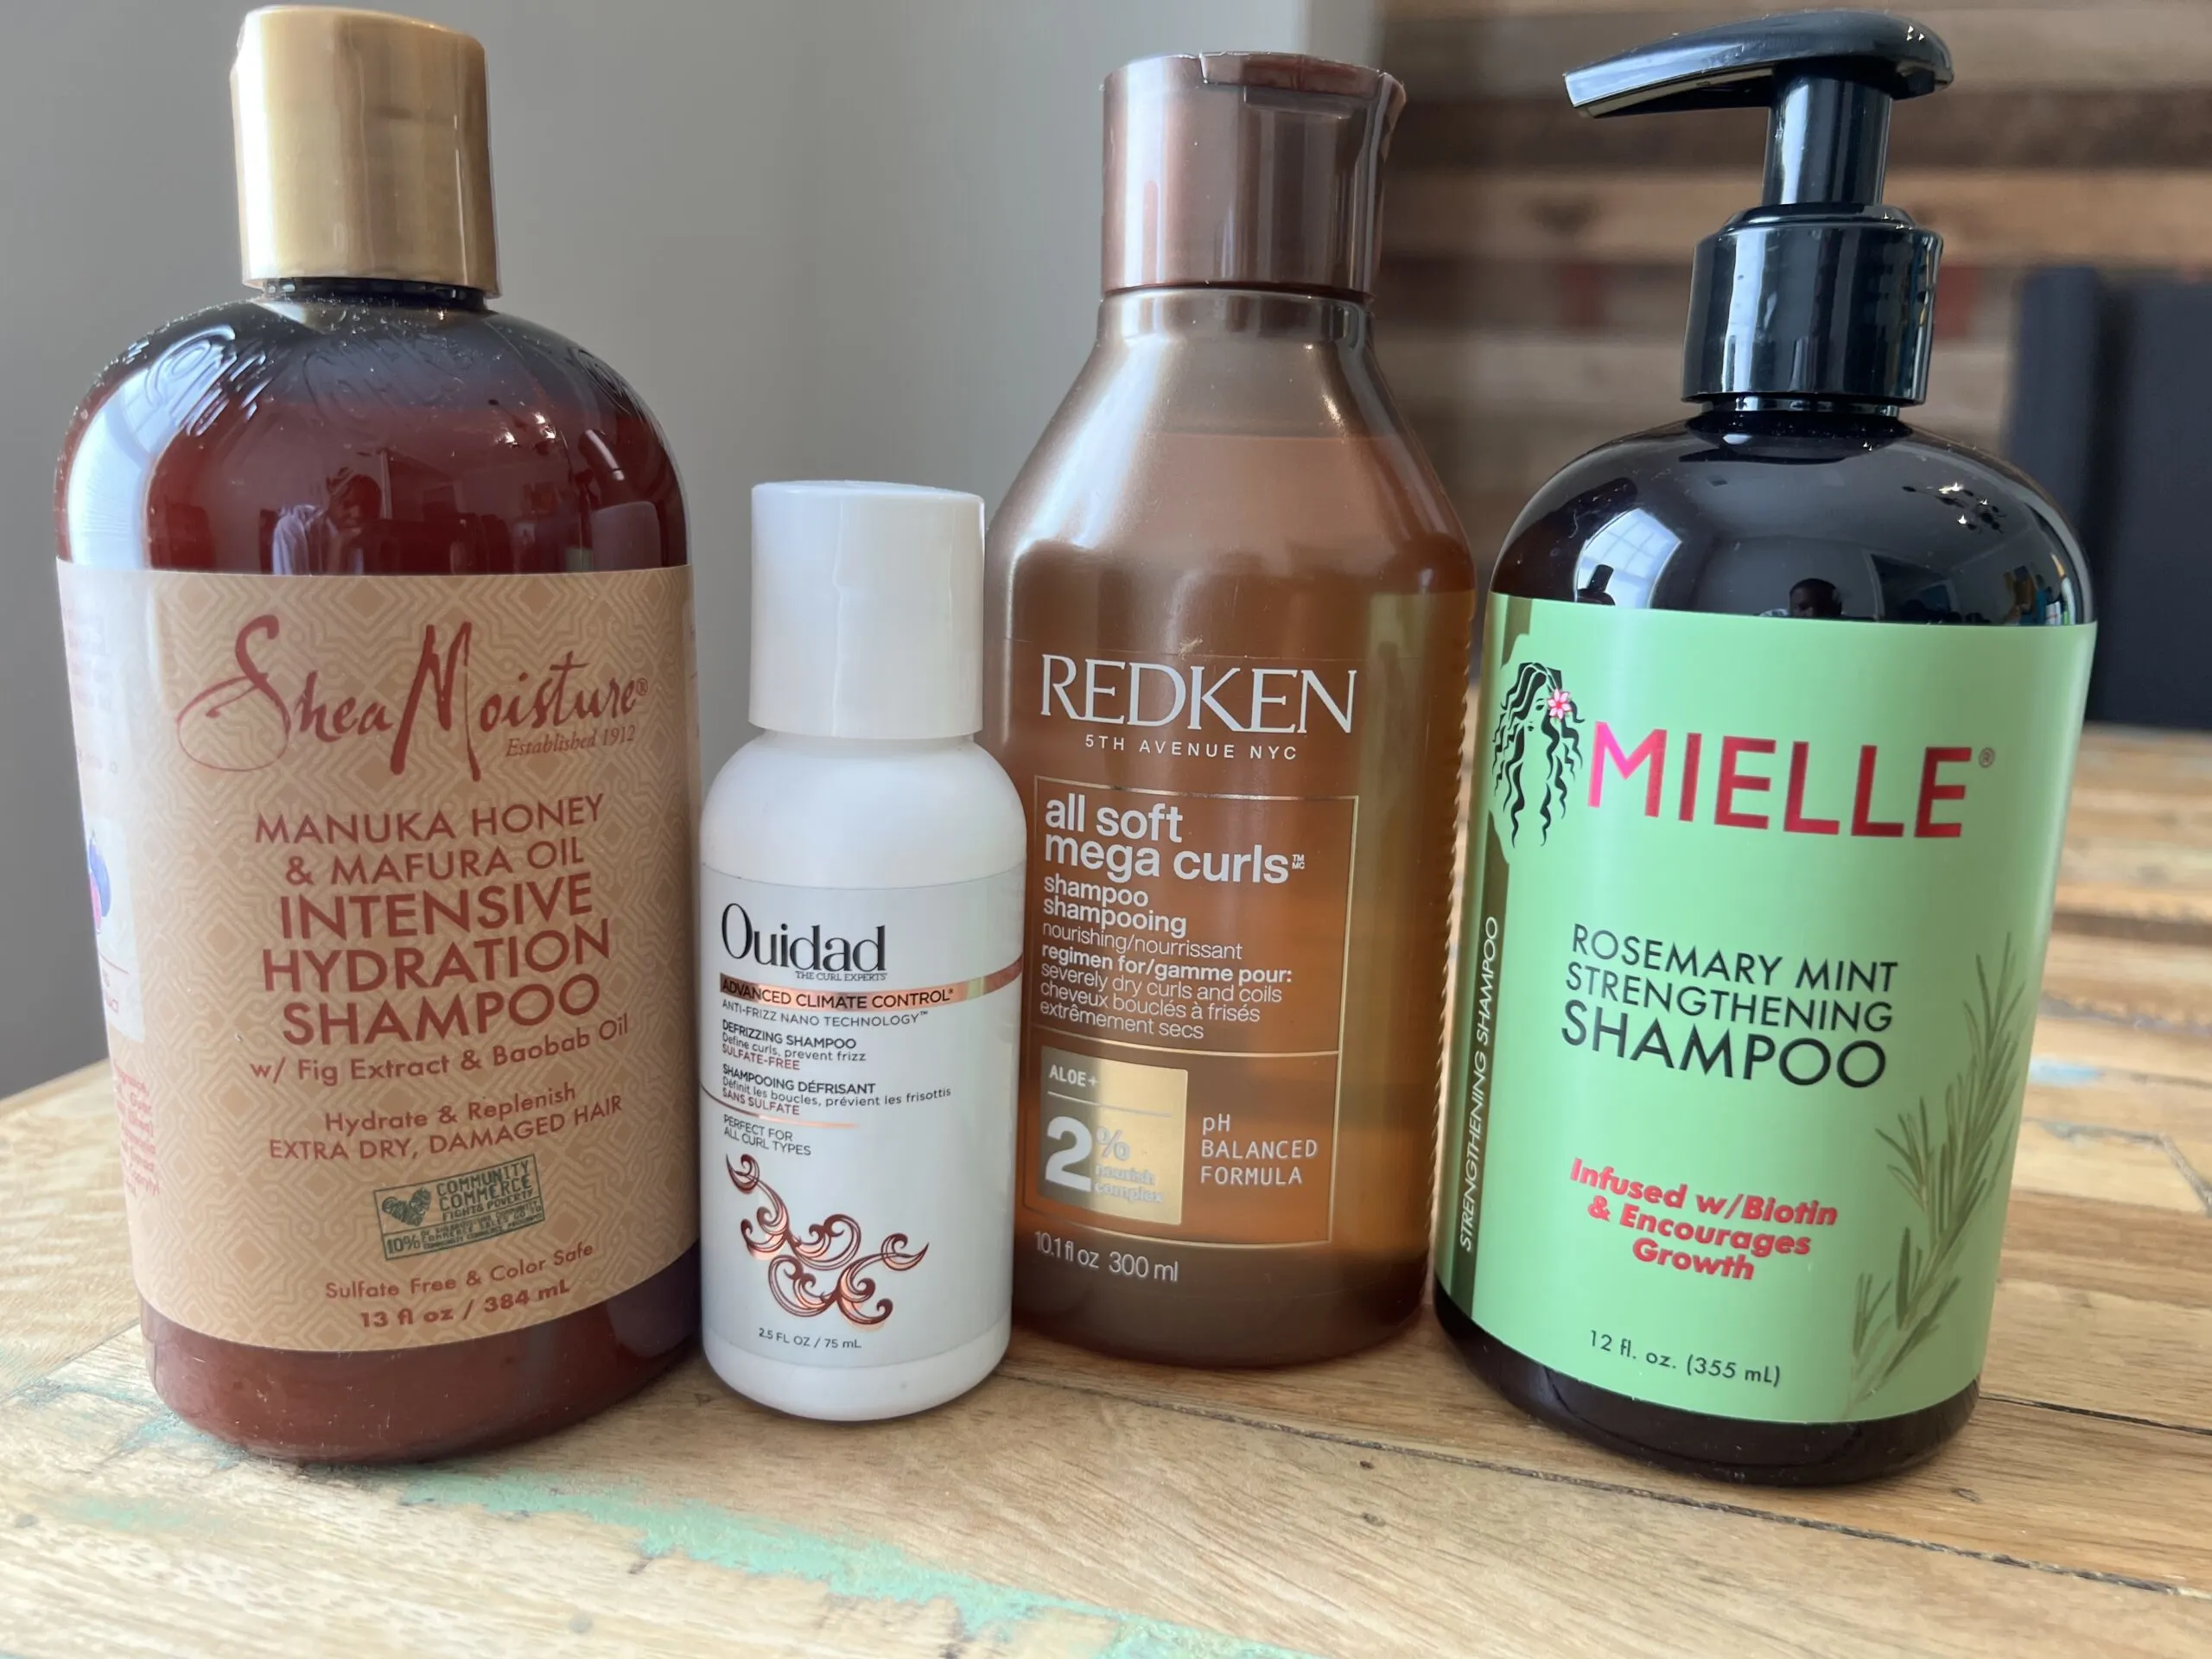 The best curly hair shampoos on the market for dry or damaged hair, loose curls, fine hair strands, thick curly hair and much more.